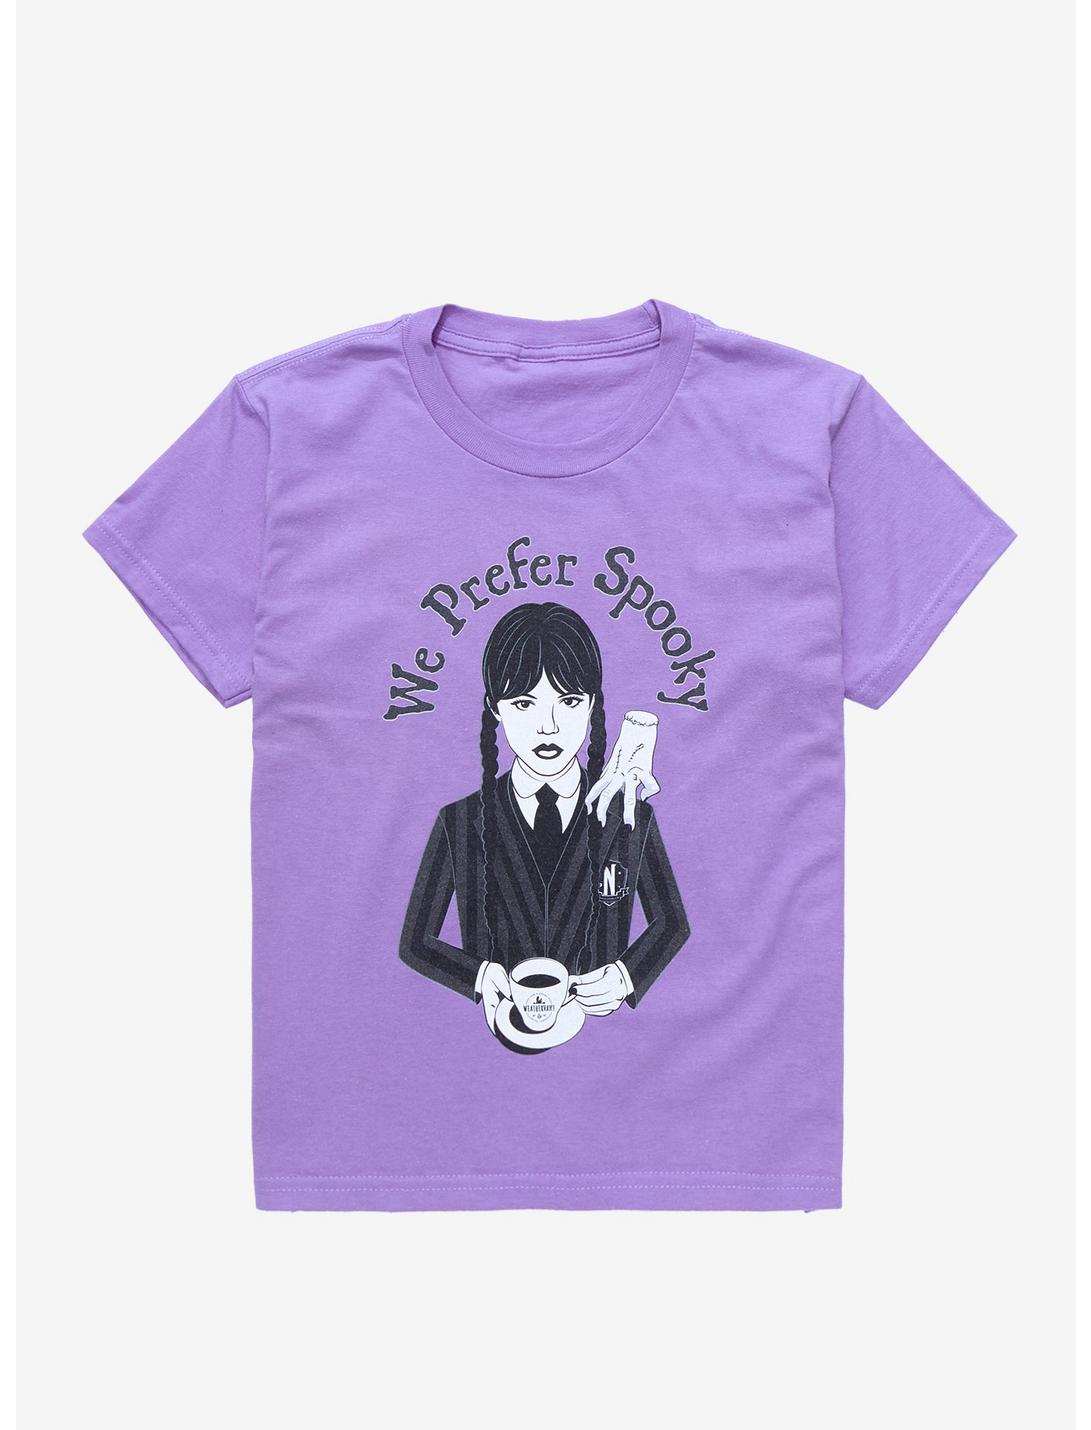 Wednesday We Prefer Spooky Youth T-Shirt - BoxLunch Exclusive, LAVENDER, hi-res